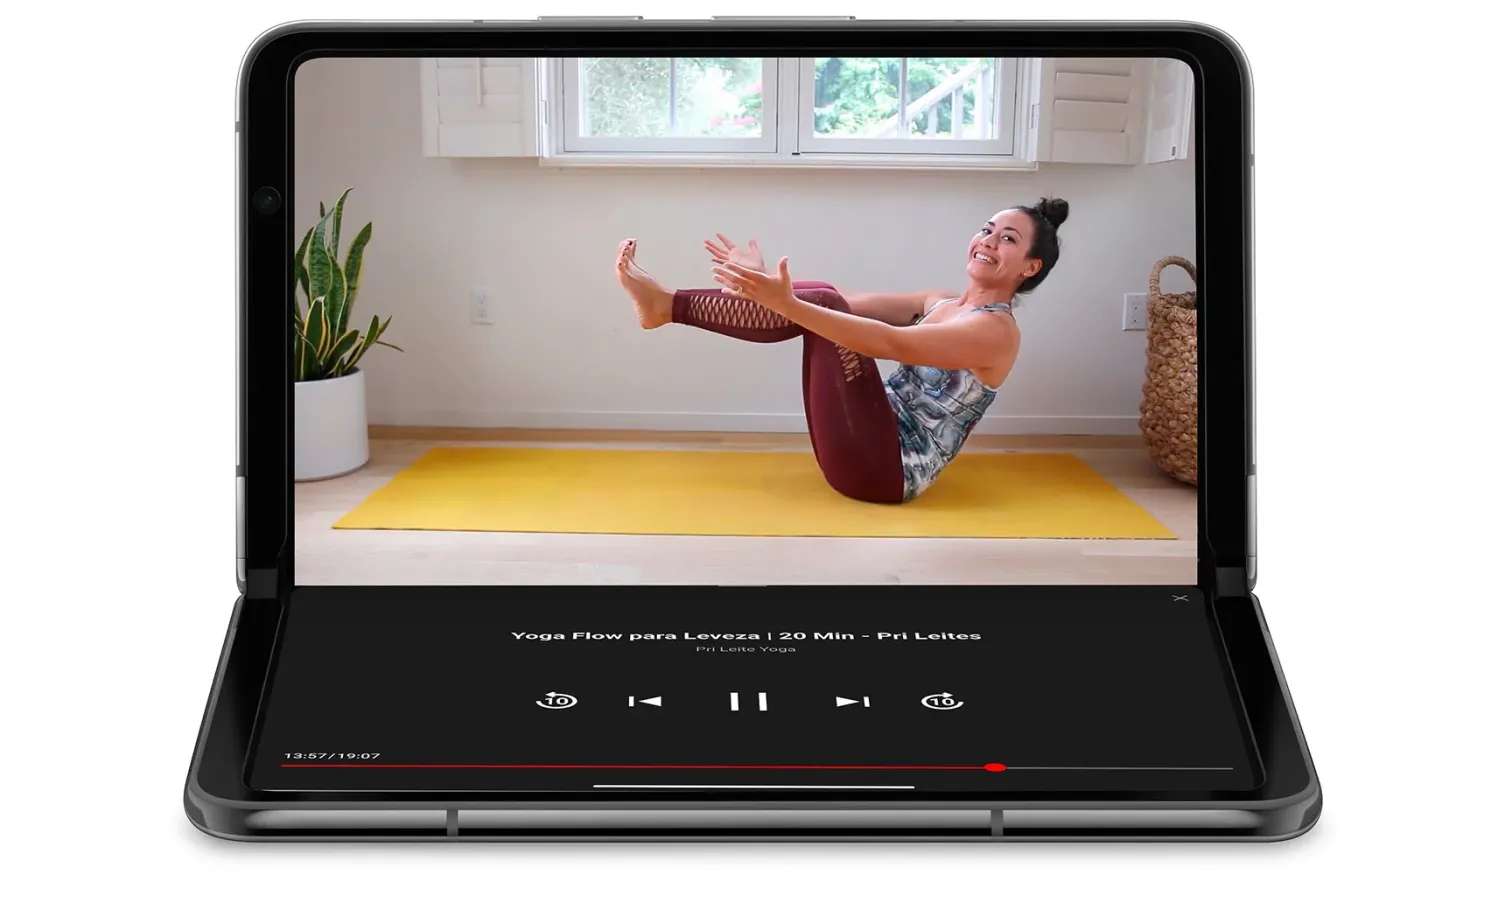 For apps like YouTube that have optimized desktops, it's critical that the Pixel Fold can accurately detect posture, which includes screen orientation and location. (Image credit: Google)